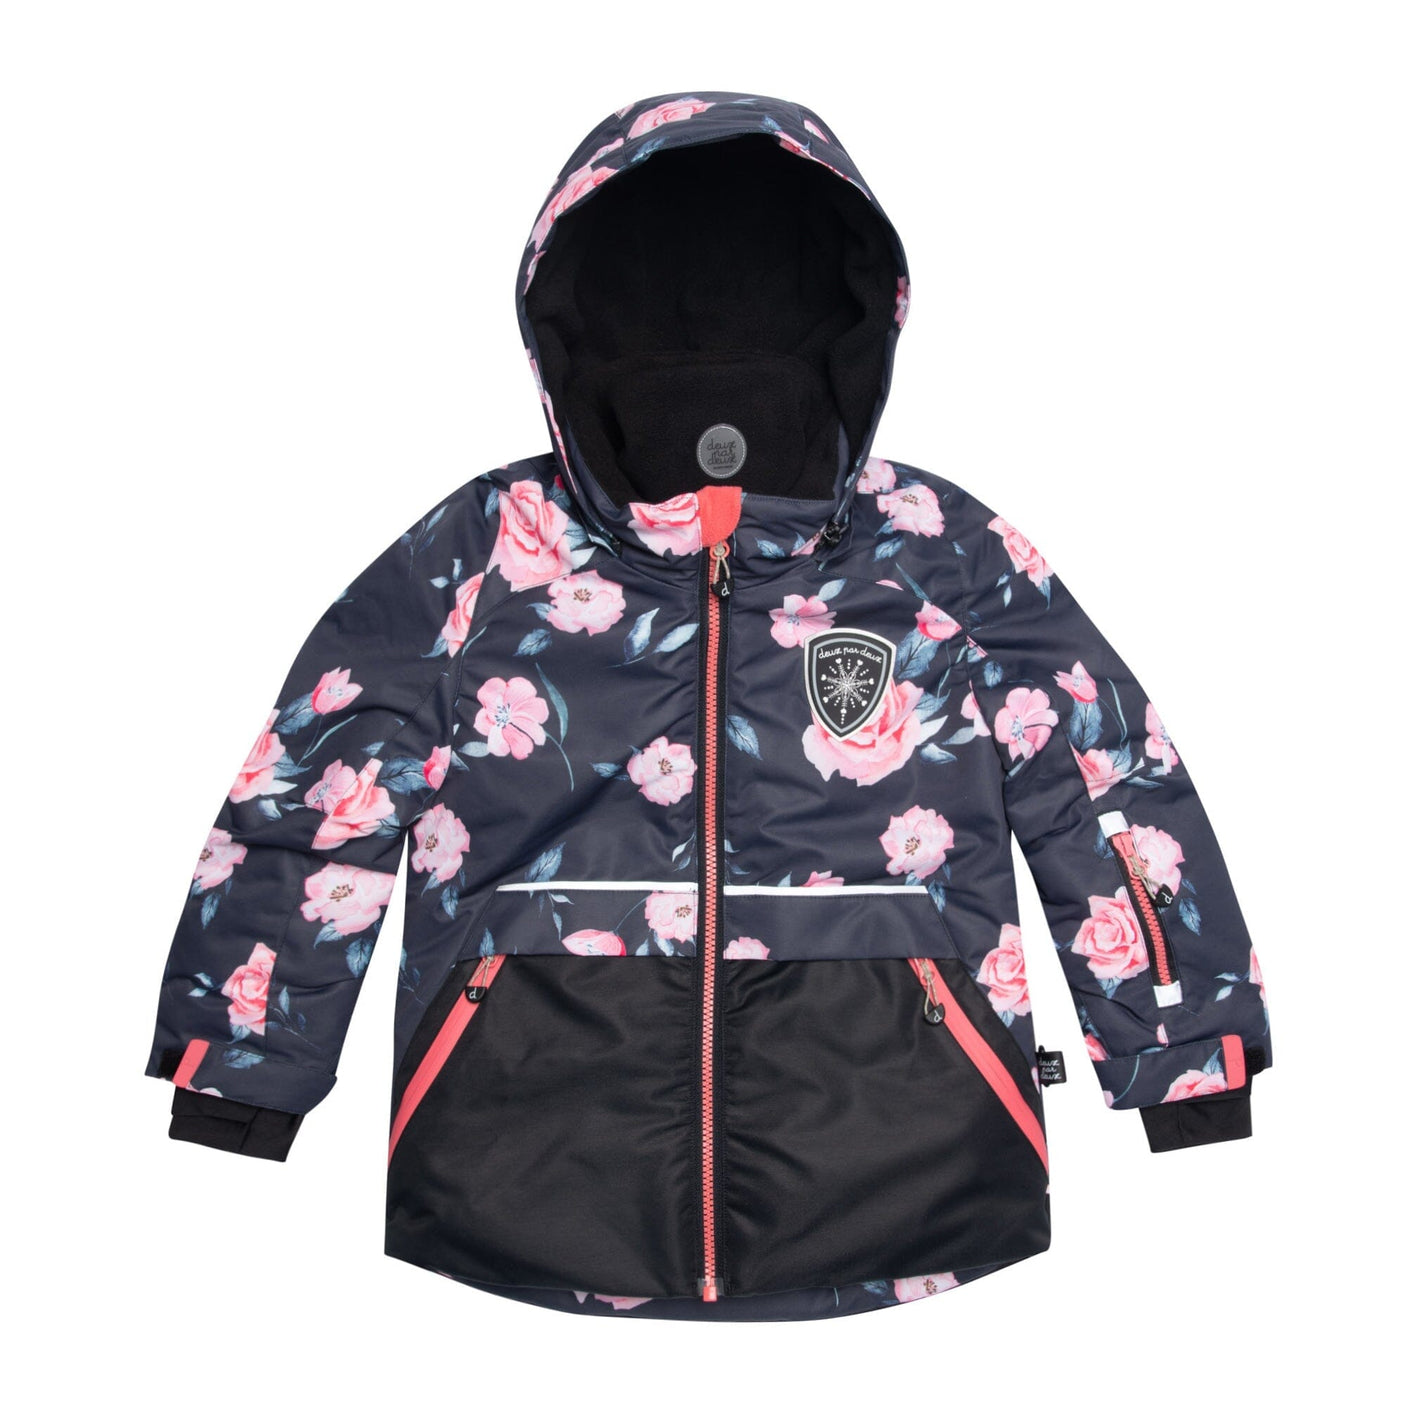 Two Piece Snowsuit Black With Rose Print-2